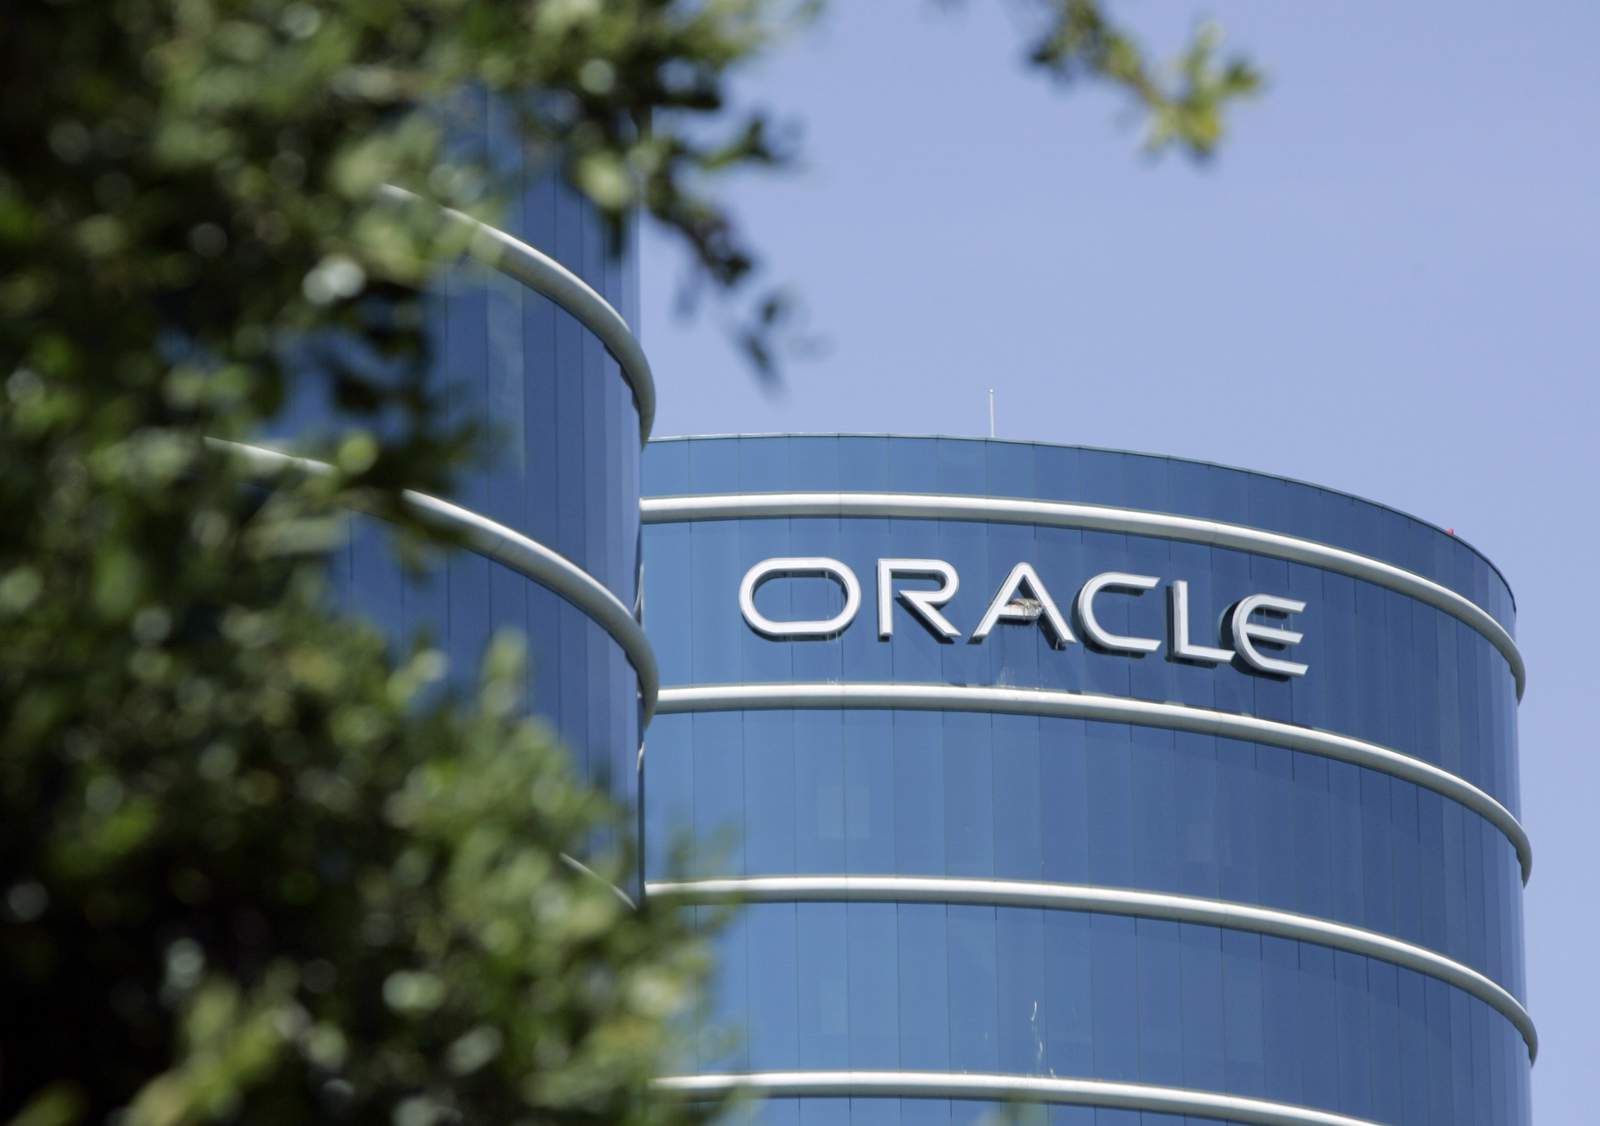 Oracle says it will move HQ from Silicon Valley to Texas